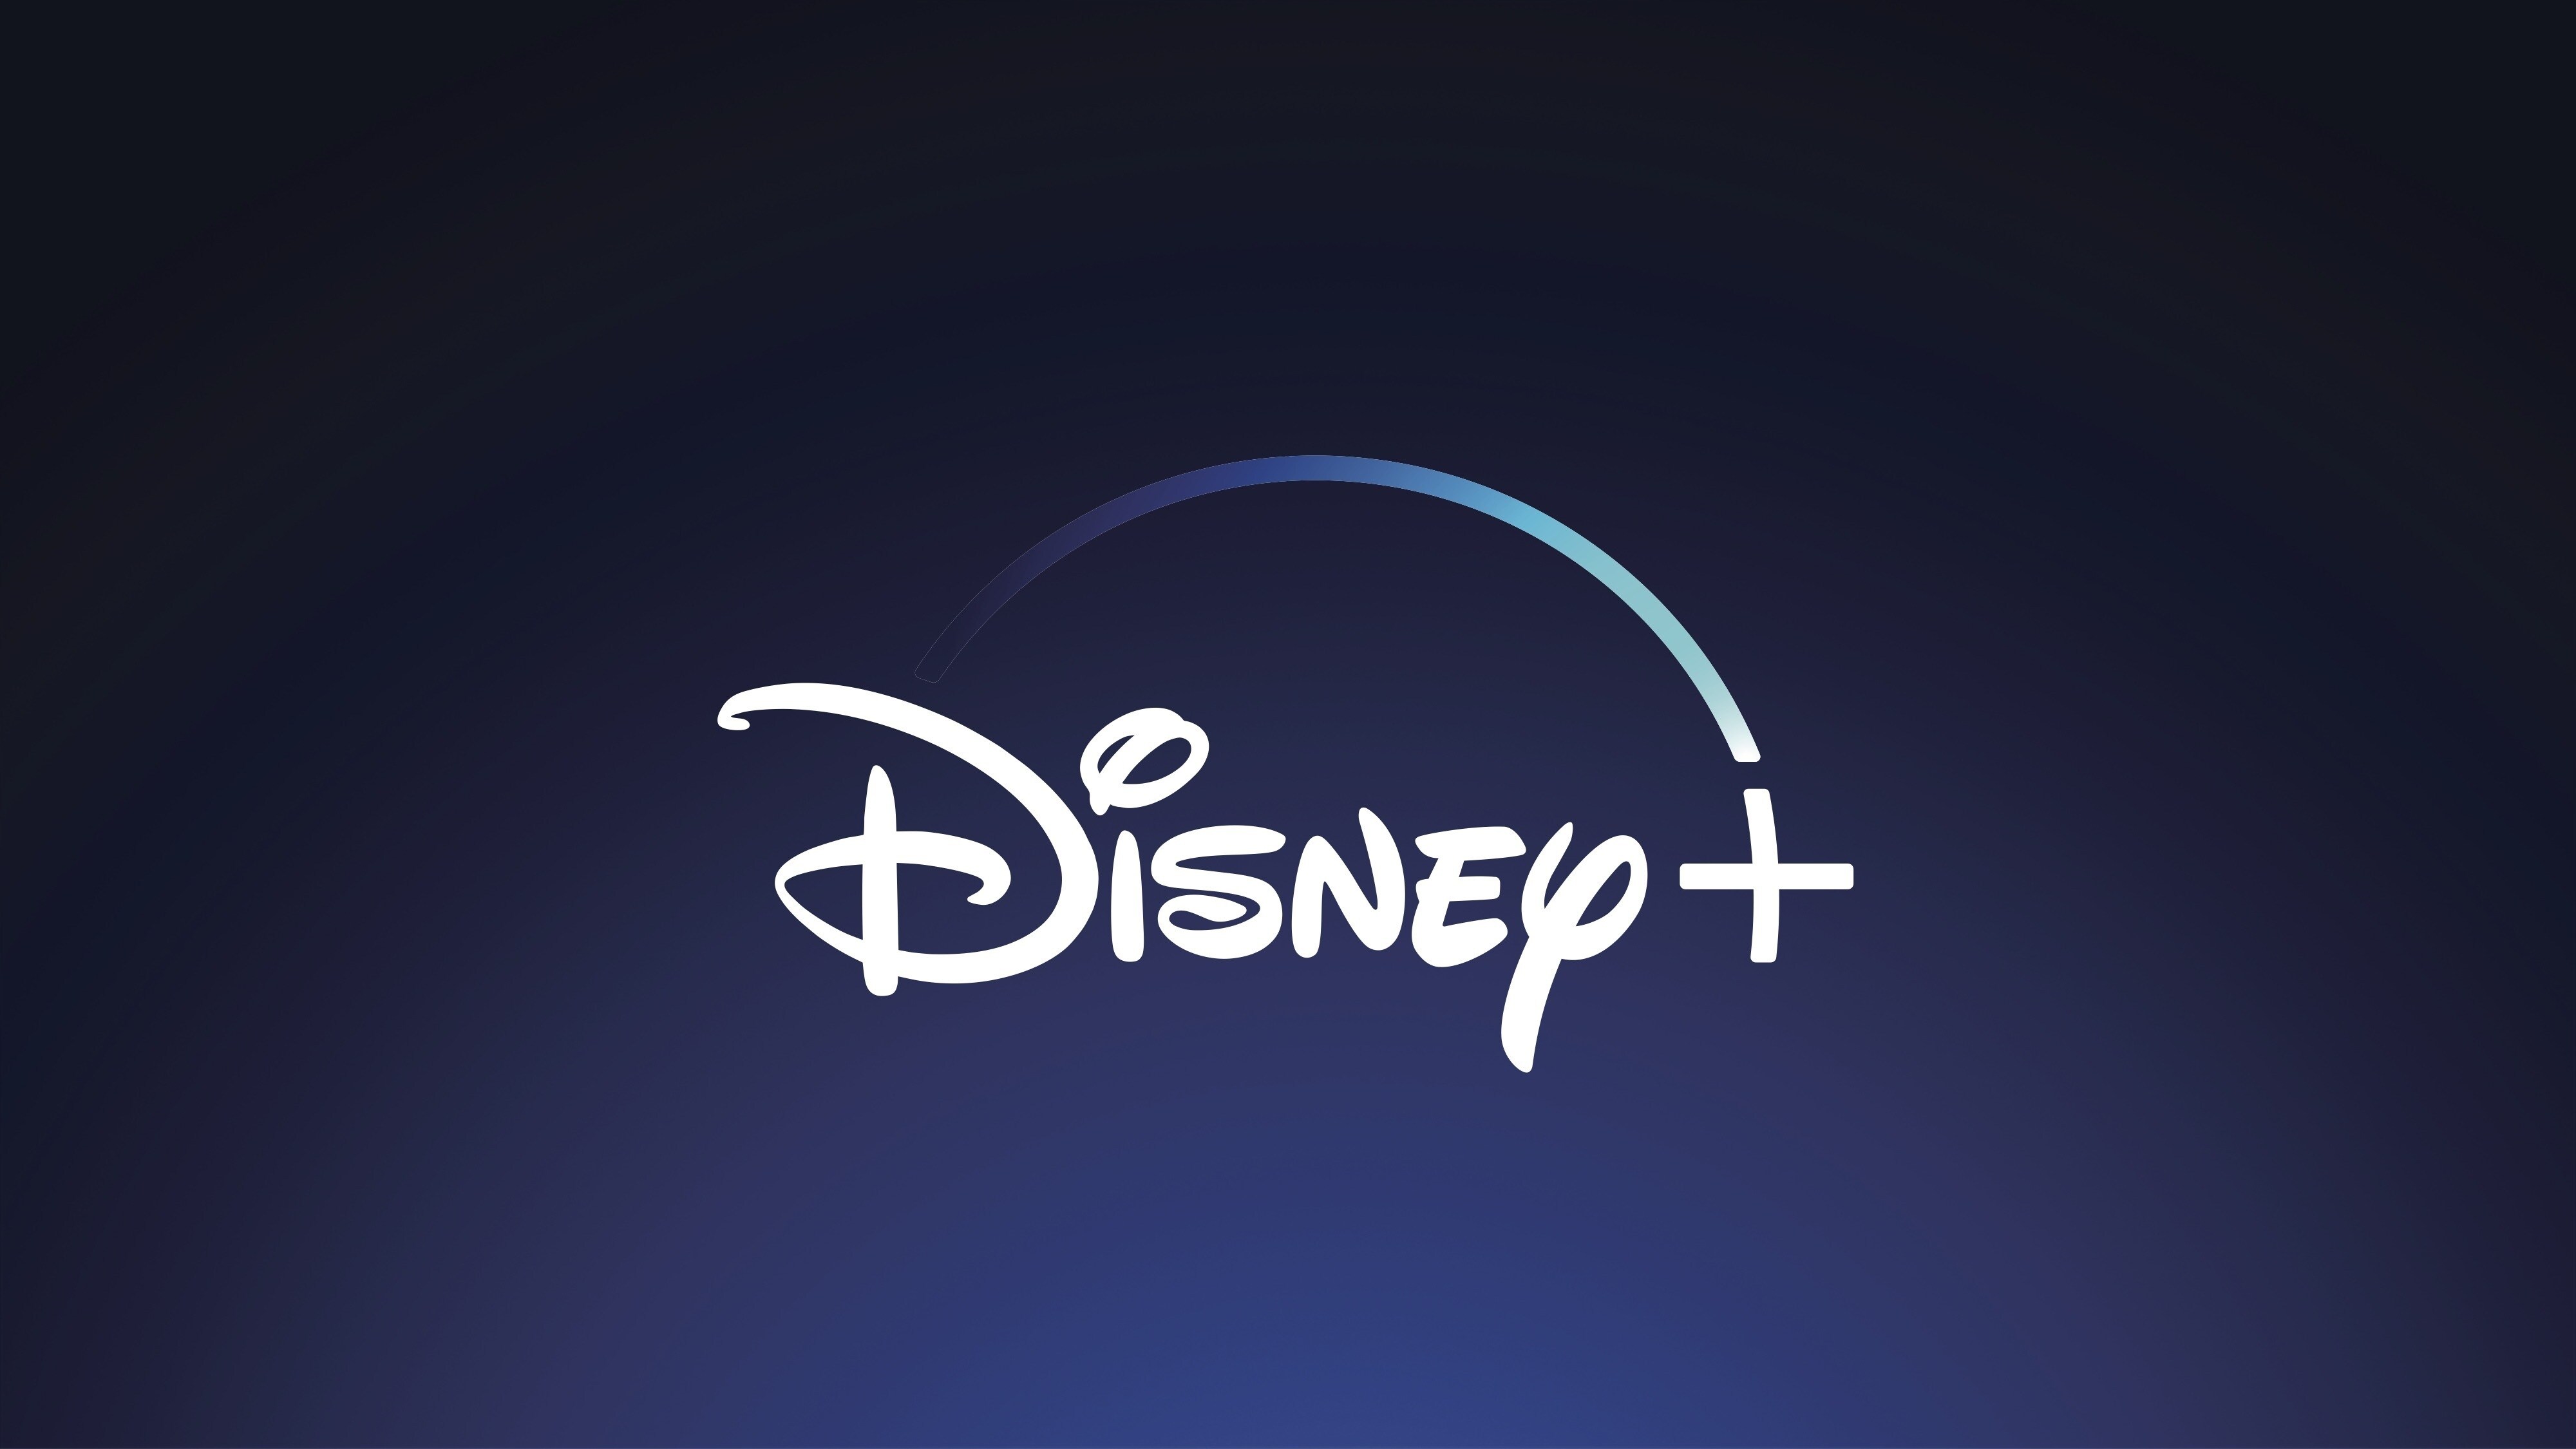 Coming this autumn on Disney+: A new season of original movies, series and blockbuster movies coming to Disney+ 